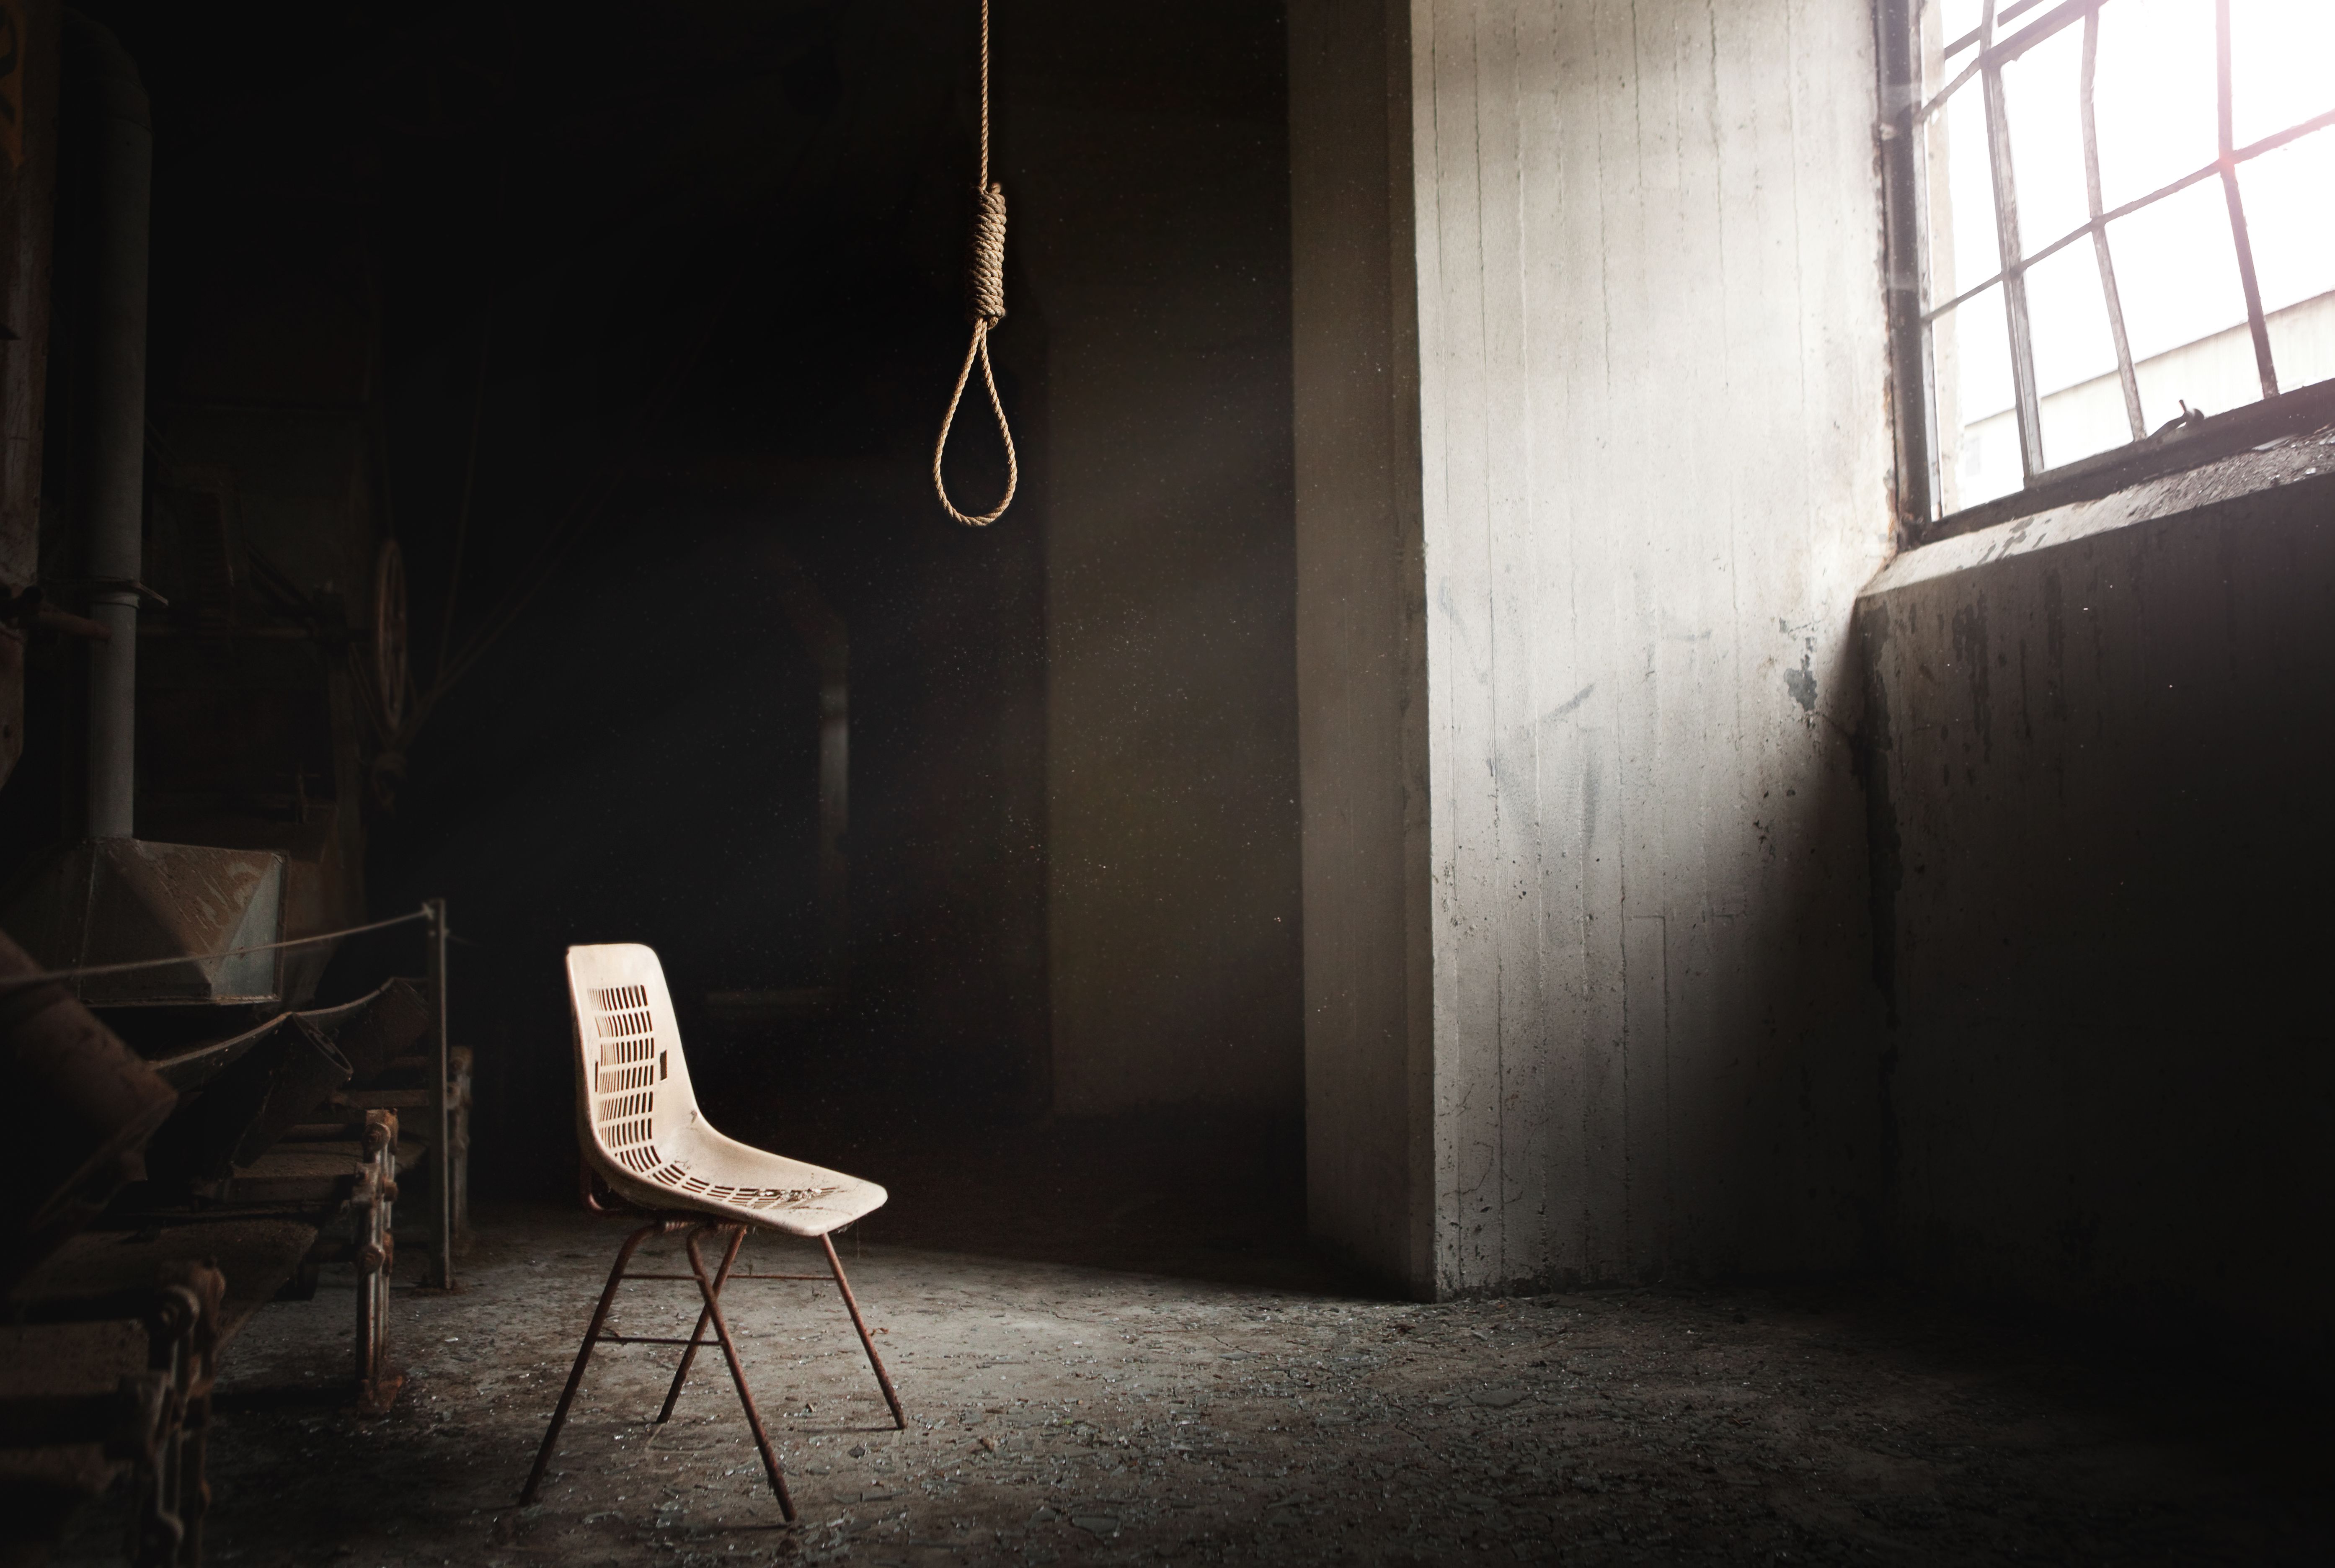 Hanging Themselves was the Only to see How Hanging Works | Mental